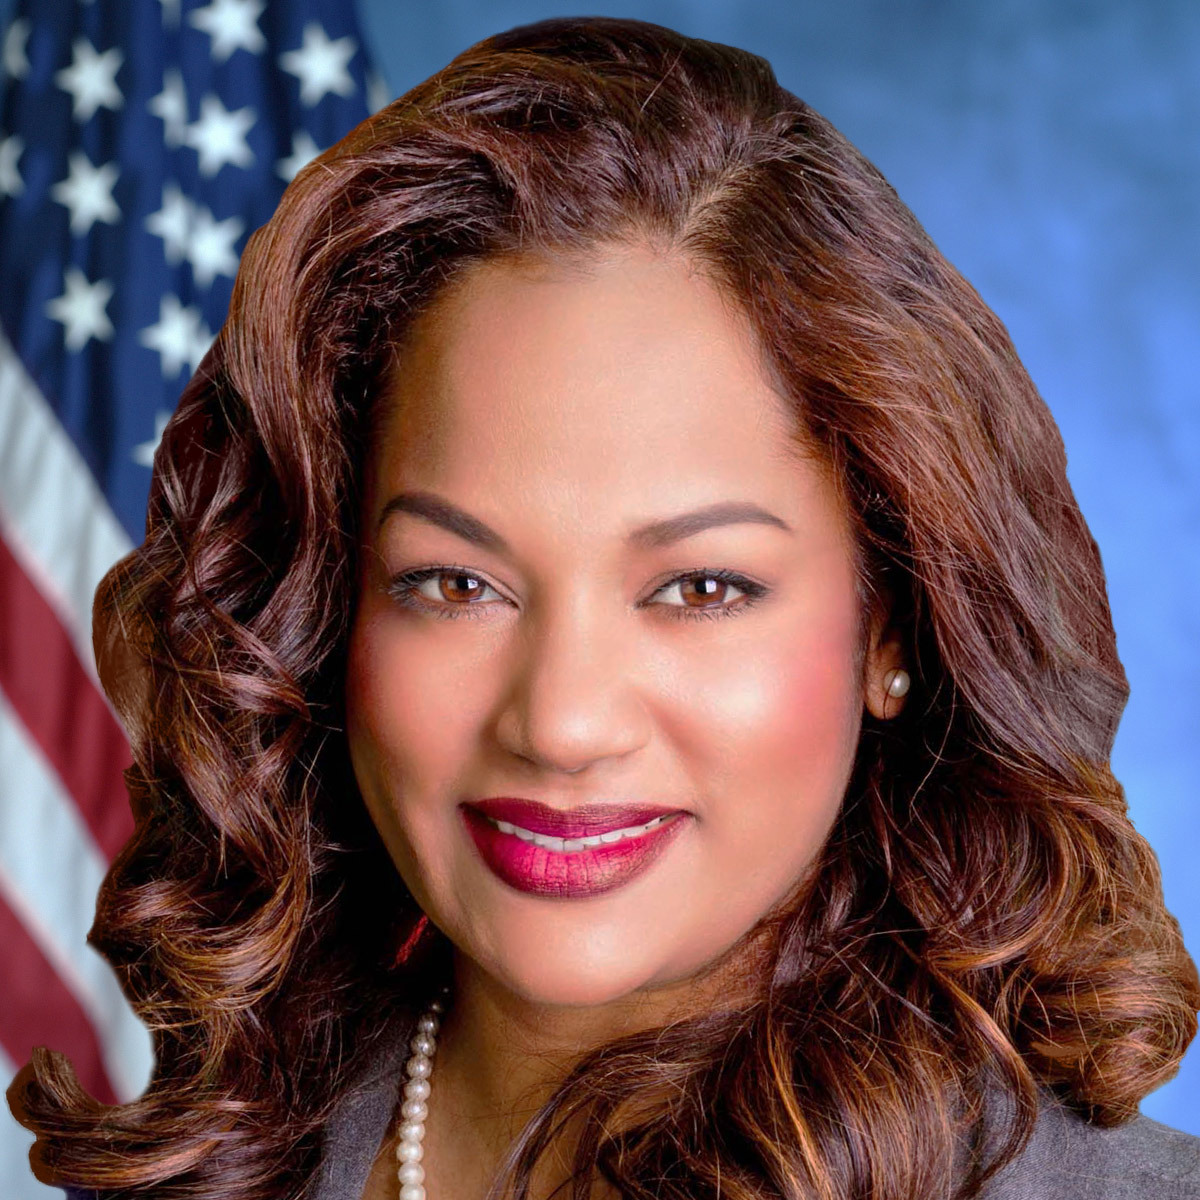 Assembly Member Jaimie Williams. Photo: Assemblymember Williams